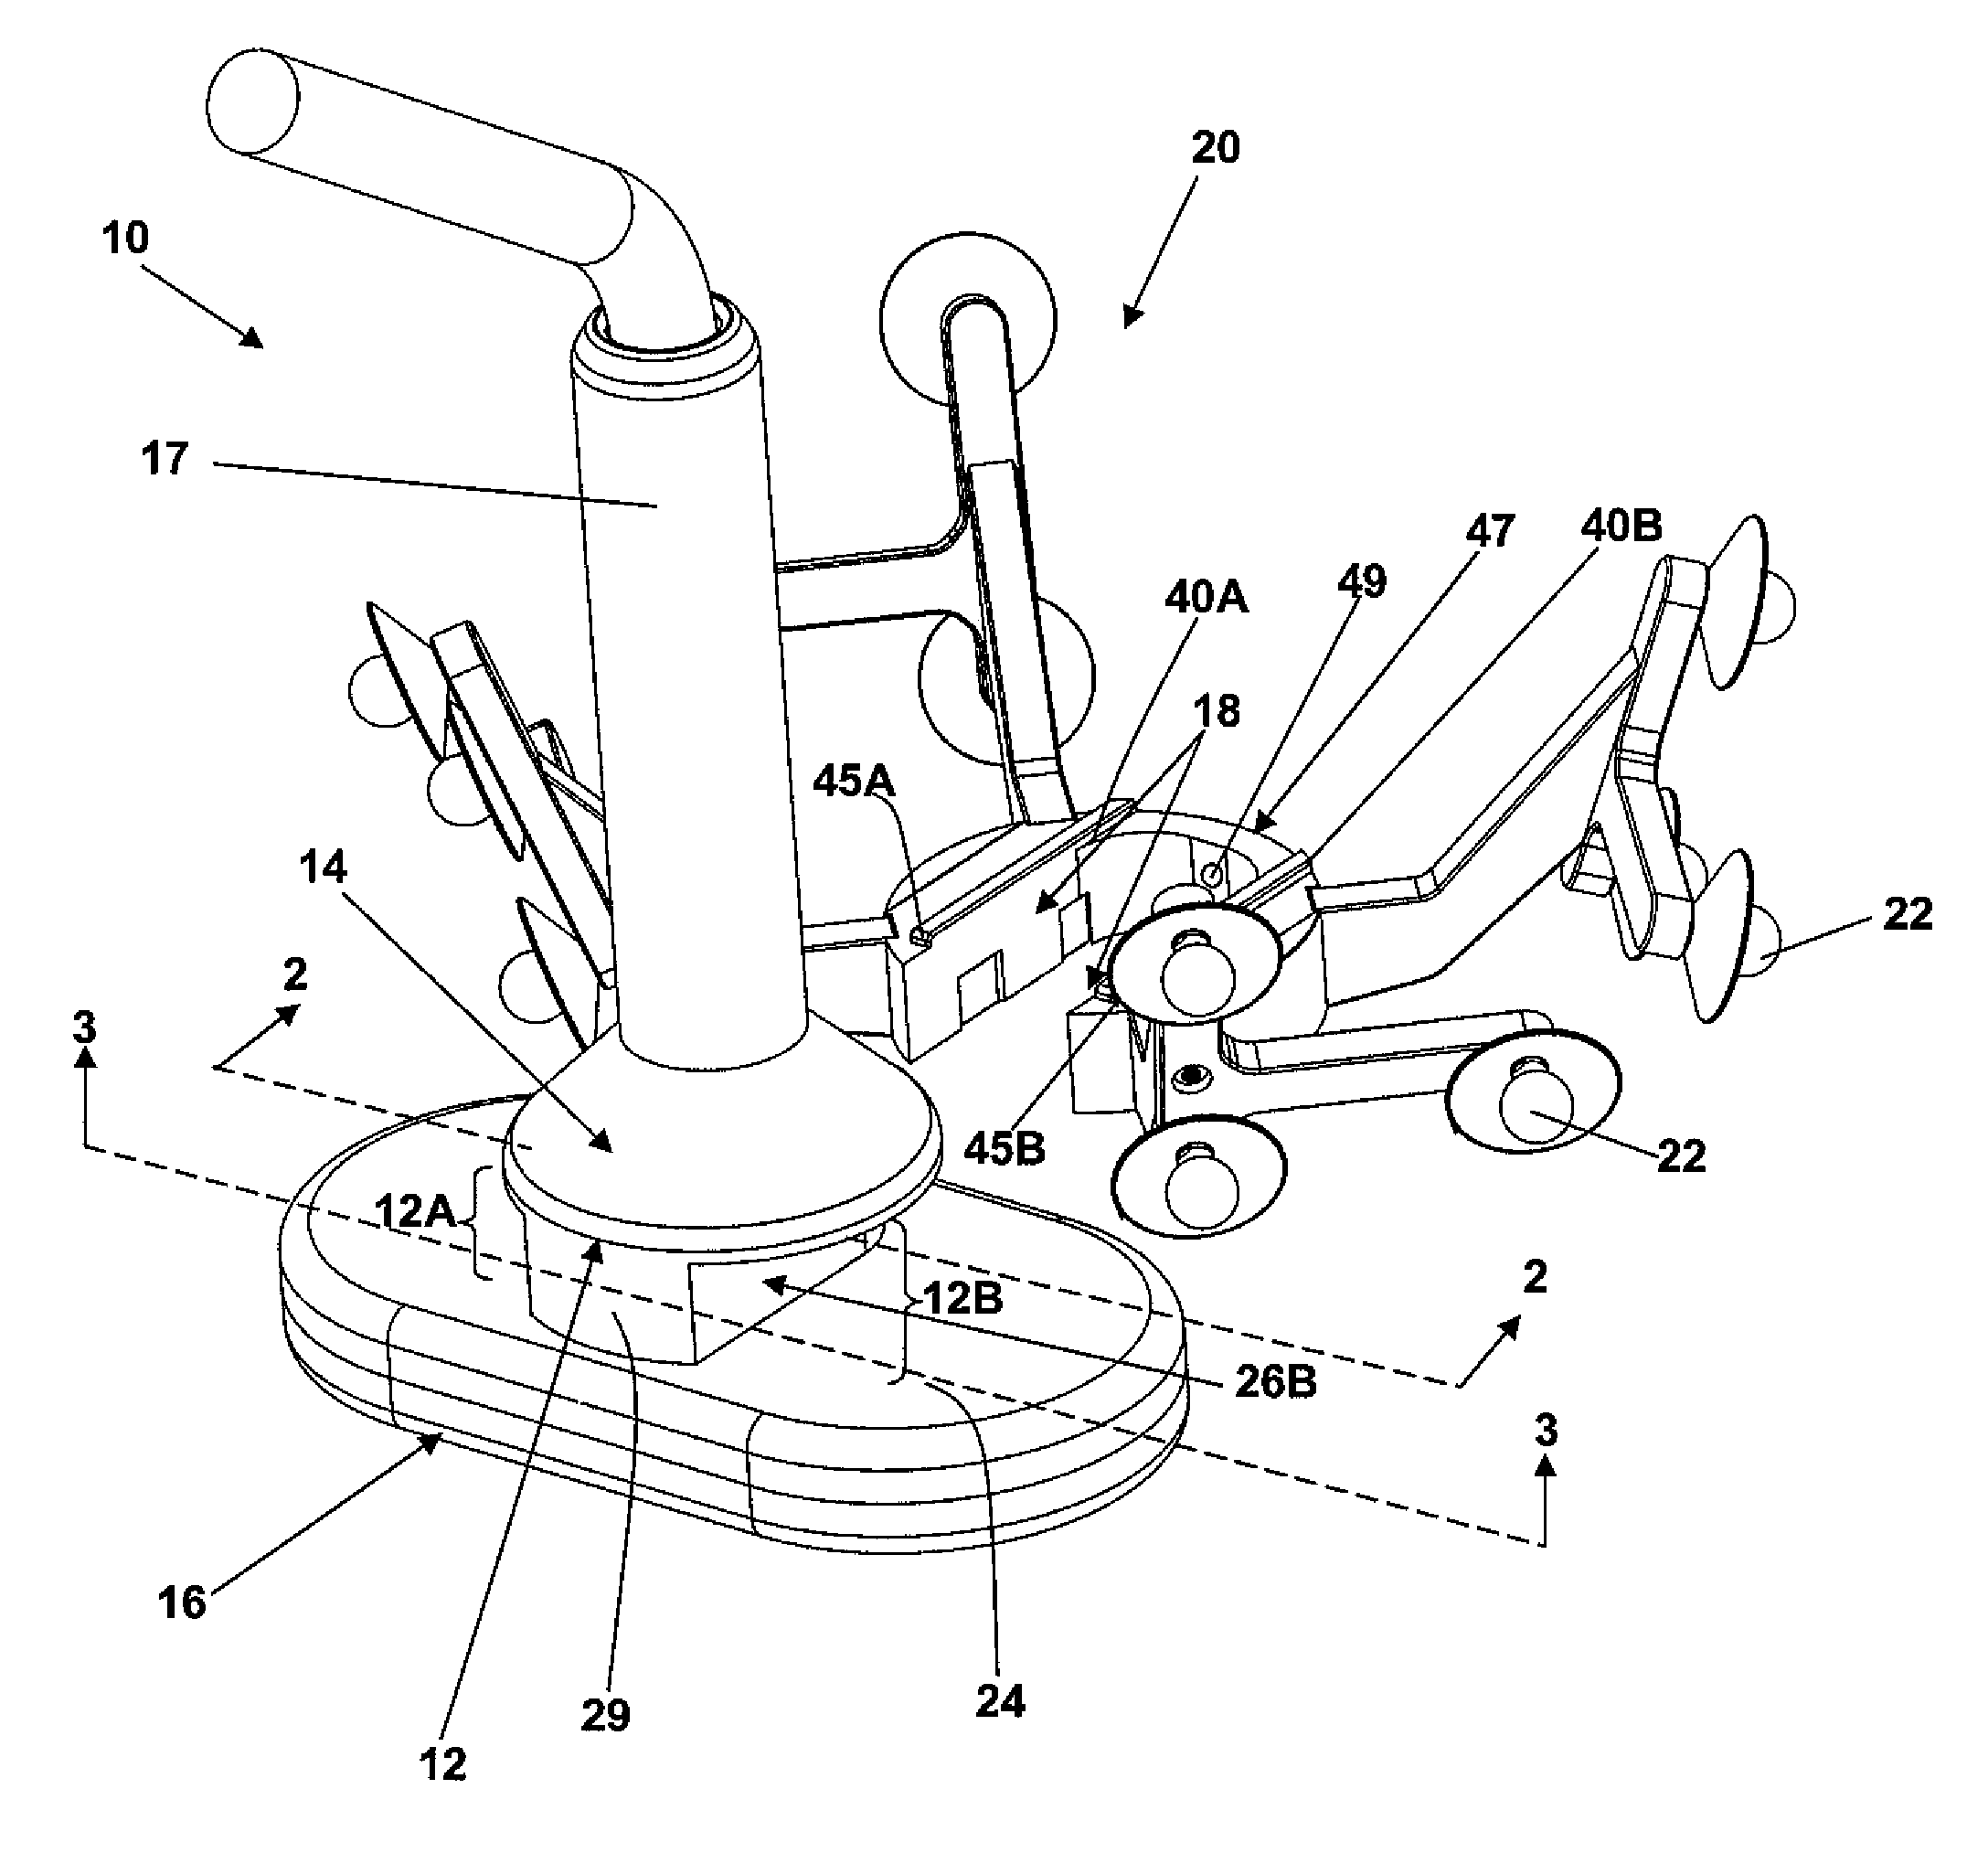 Transcranial Magnetic Stimulation Induction Coil Device With Attachment Portion for Receiving Tracking Device